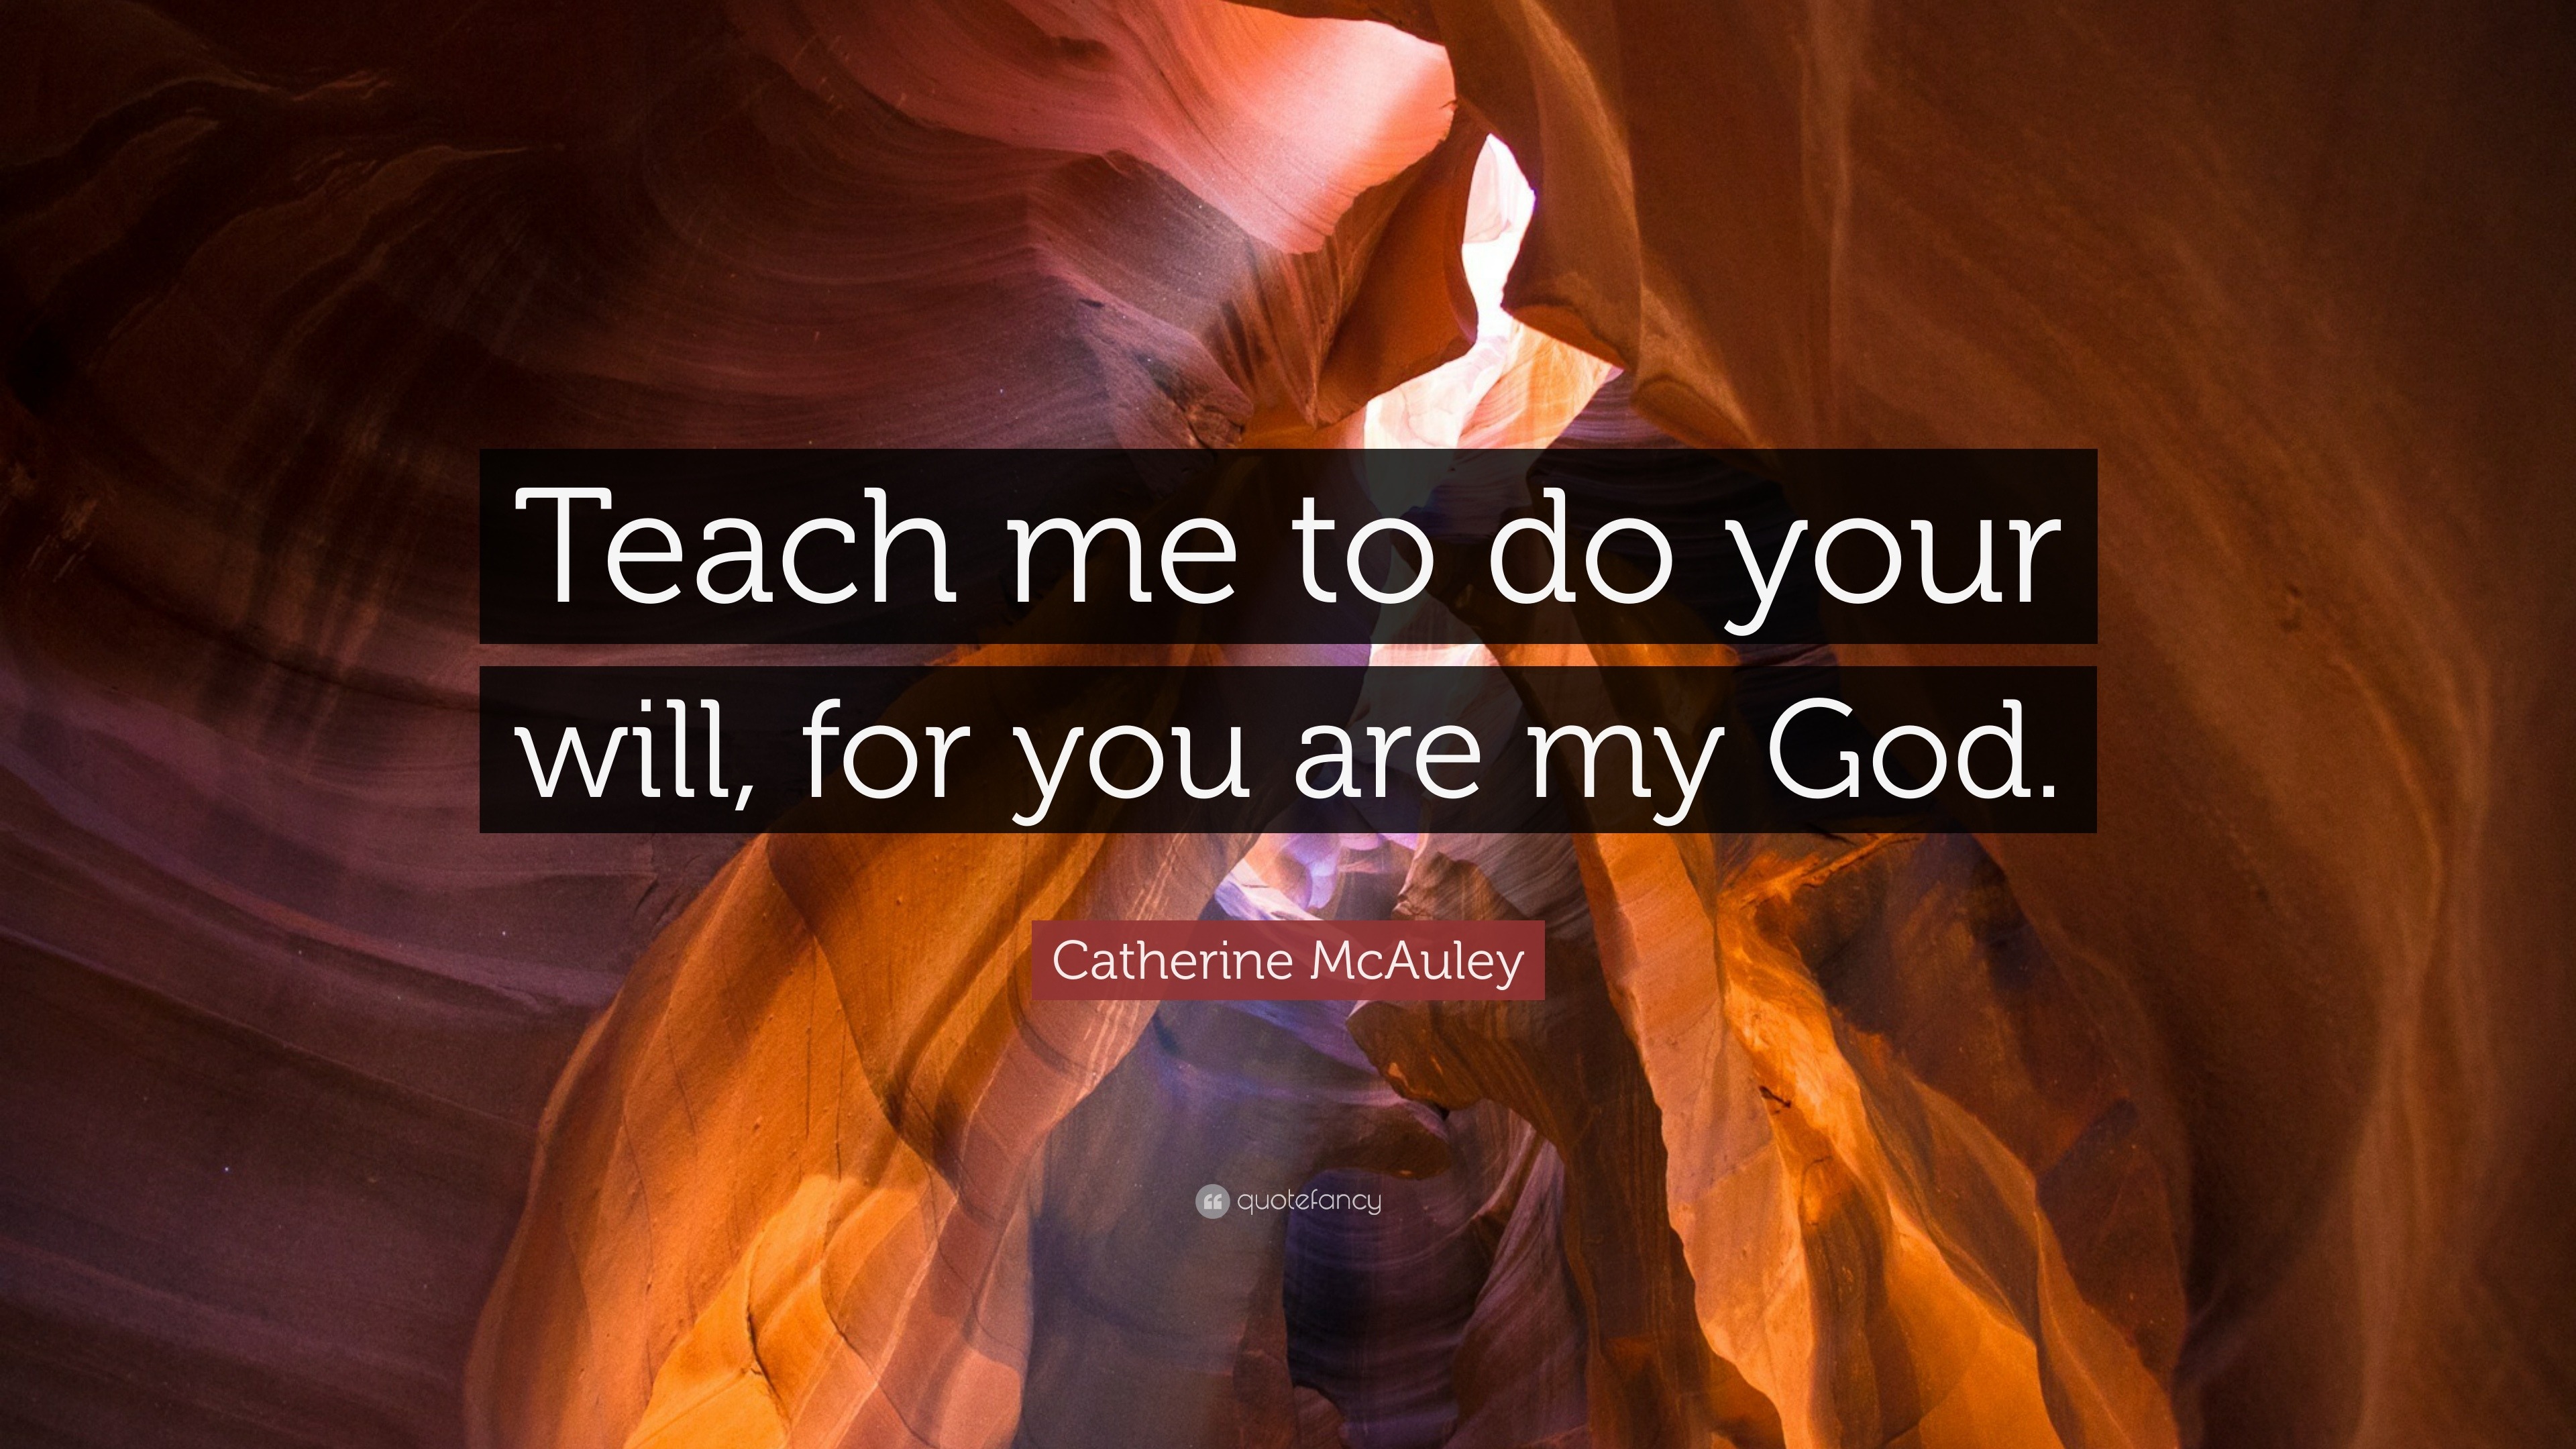 Catherine McAuley Quotes (23 wallpapers) - Quotefancy